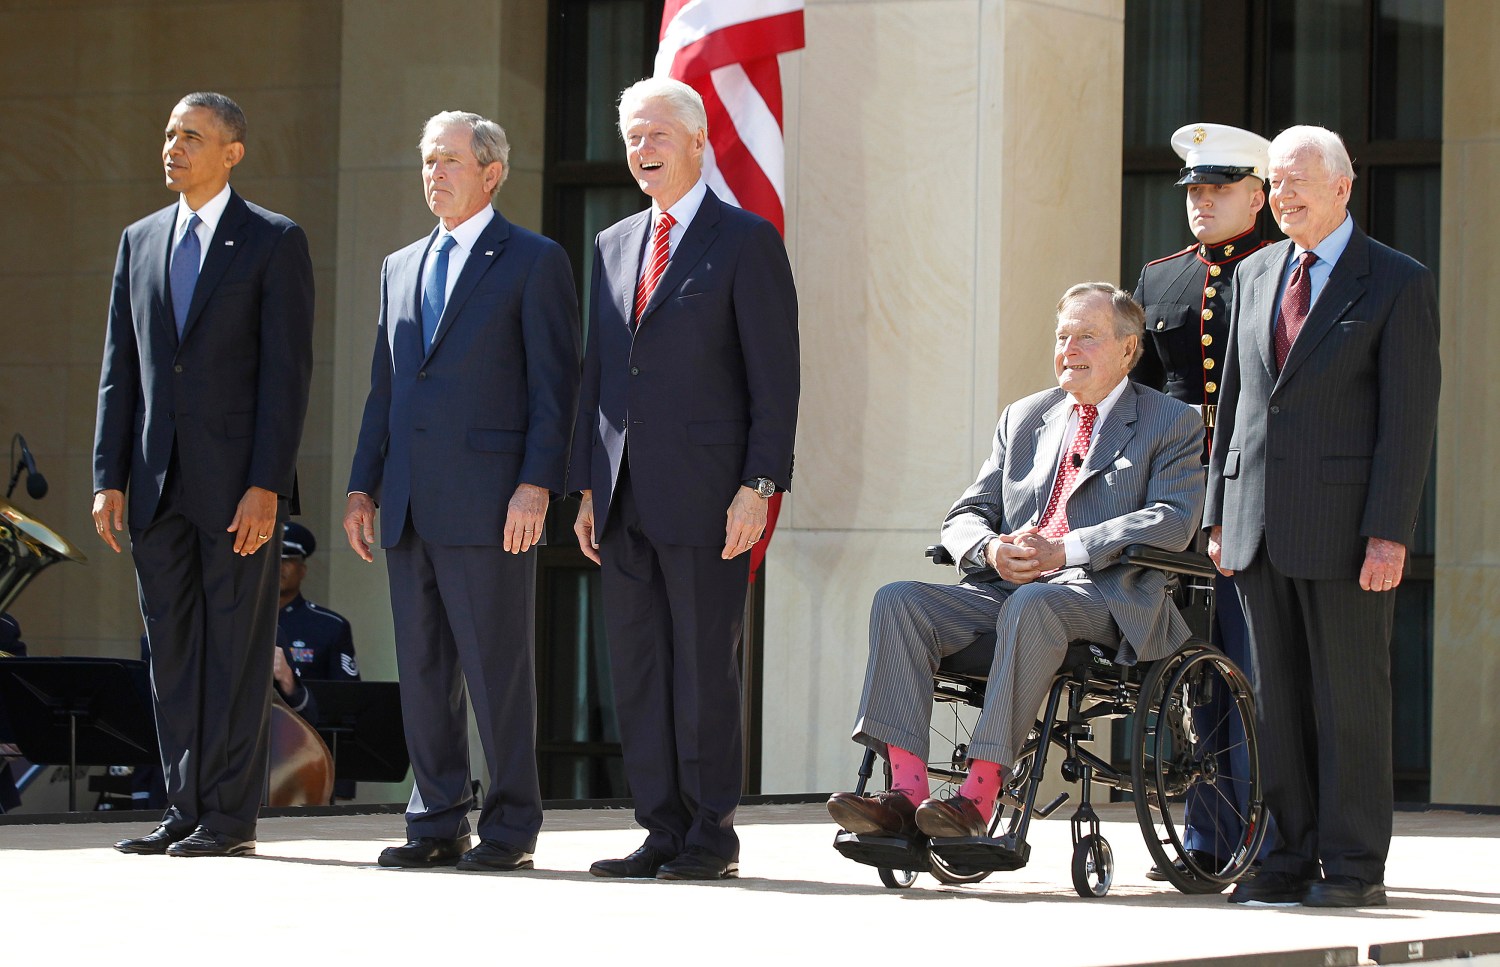 (From L - R) U.S. President Barack Obama stands alongside former presidents George W. Bush, Bill Clinton, George H.W. Bush and Jimmy Carter as they attend the dedication ceremony for the George W. Bush Presidential Center in Dallas, April 25, 2013. Obama is in Texas to stand shoulder-to-shoulder with former President George W. Bush in what could serve as a powerful reminder of the ongoing struggle against terrorism, from the Sept. 11 attacks to the Boston Marathon bombings. REUTERS/Jason Reed (UNITED STATES - Tags: POLITICS) - RTXYZPF